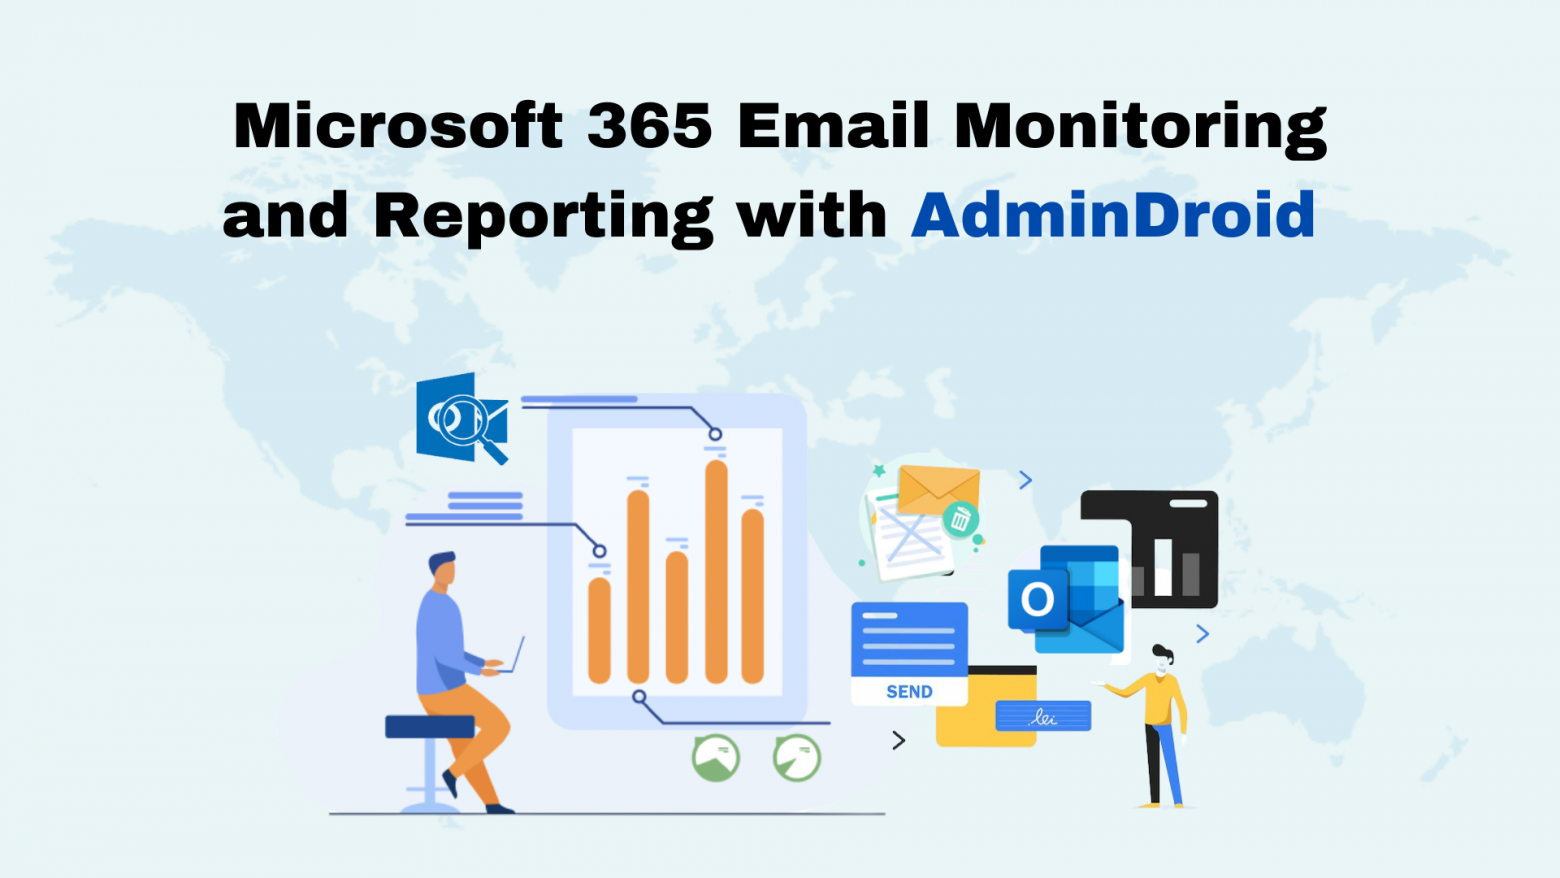 Microsoft 365 Email Monitoring and Reporting with AdminDroid